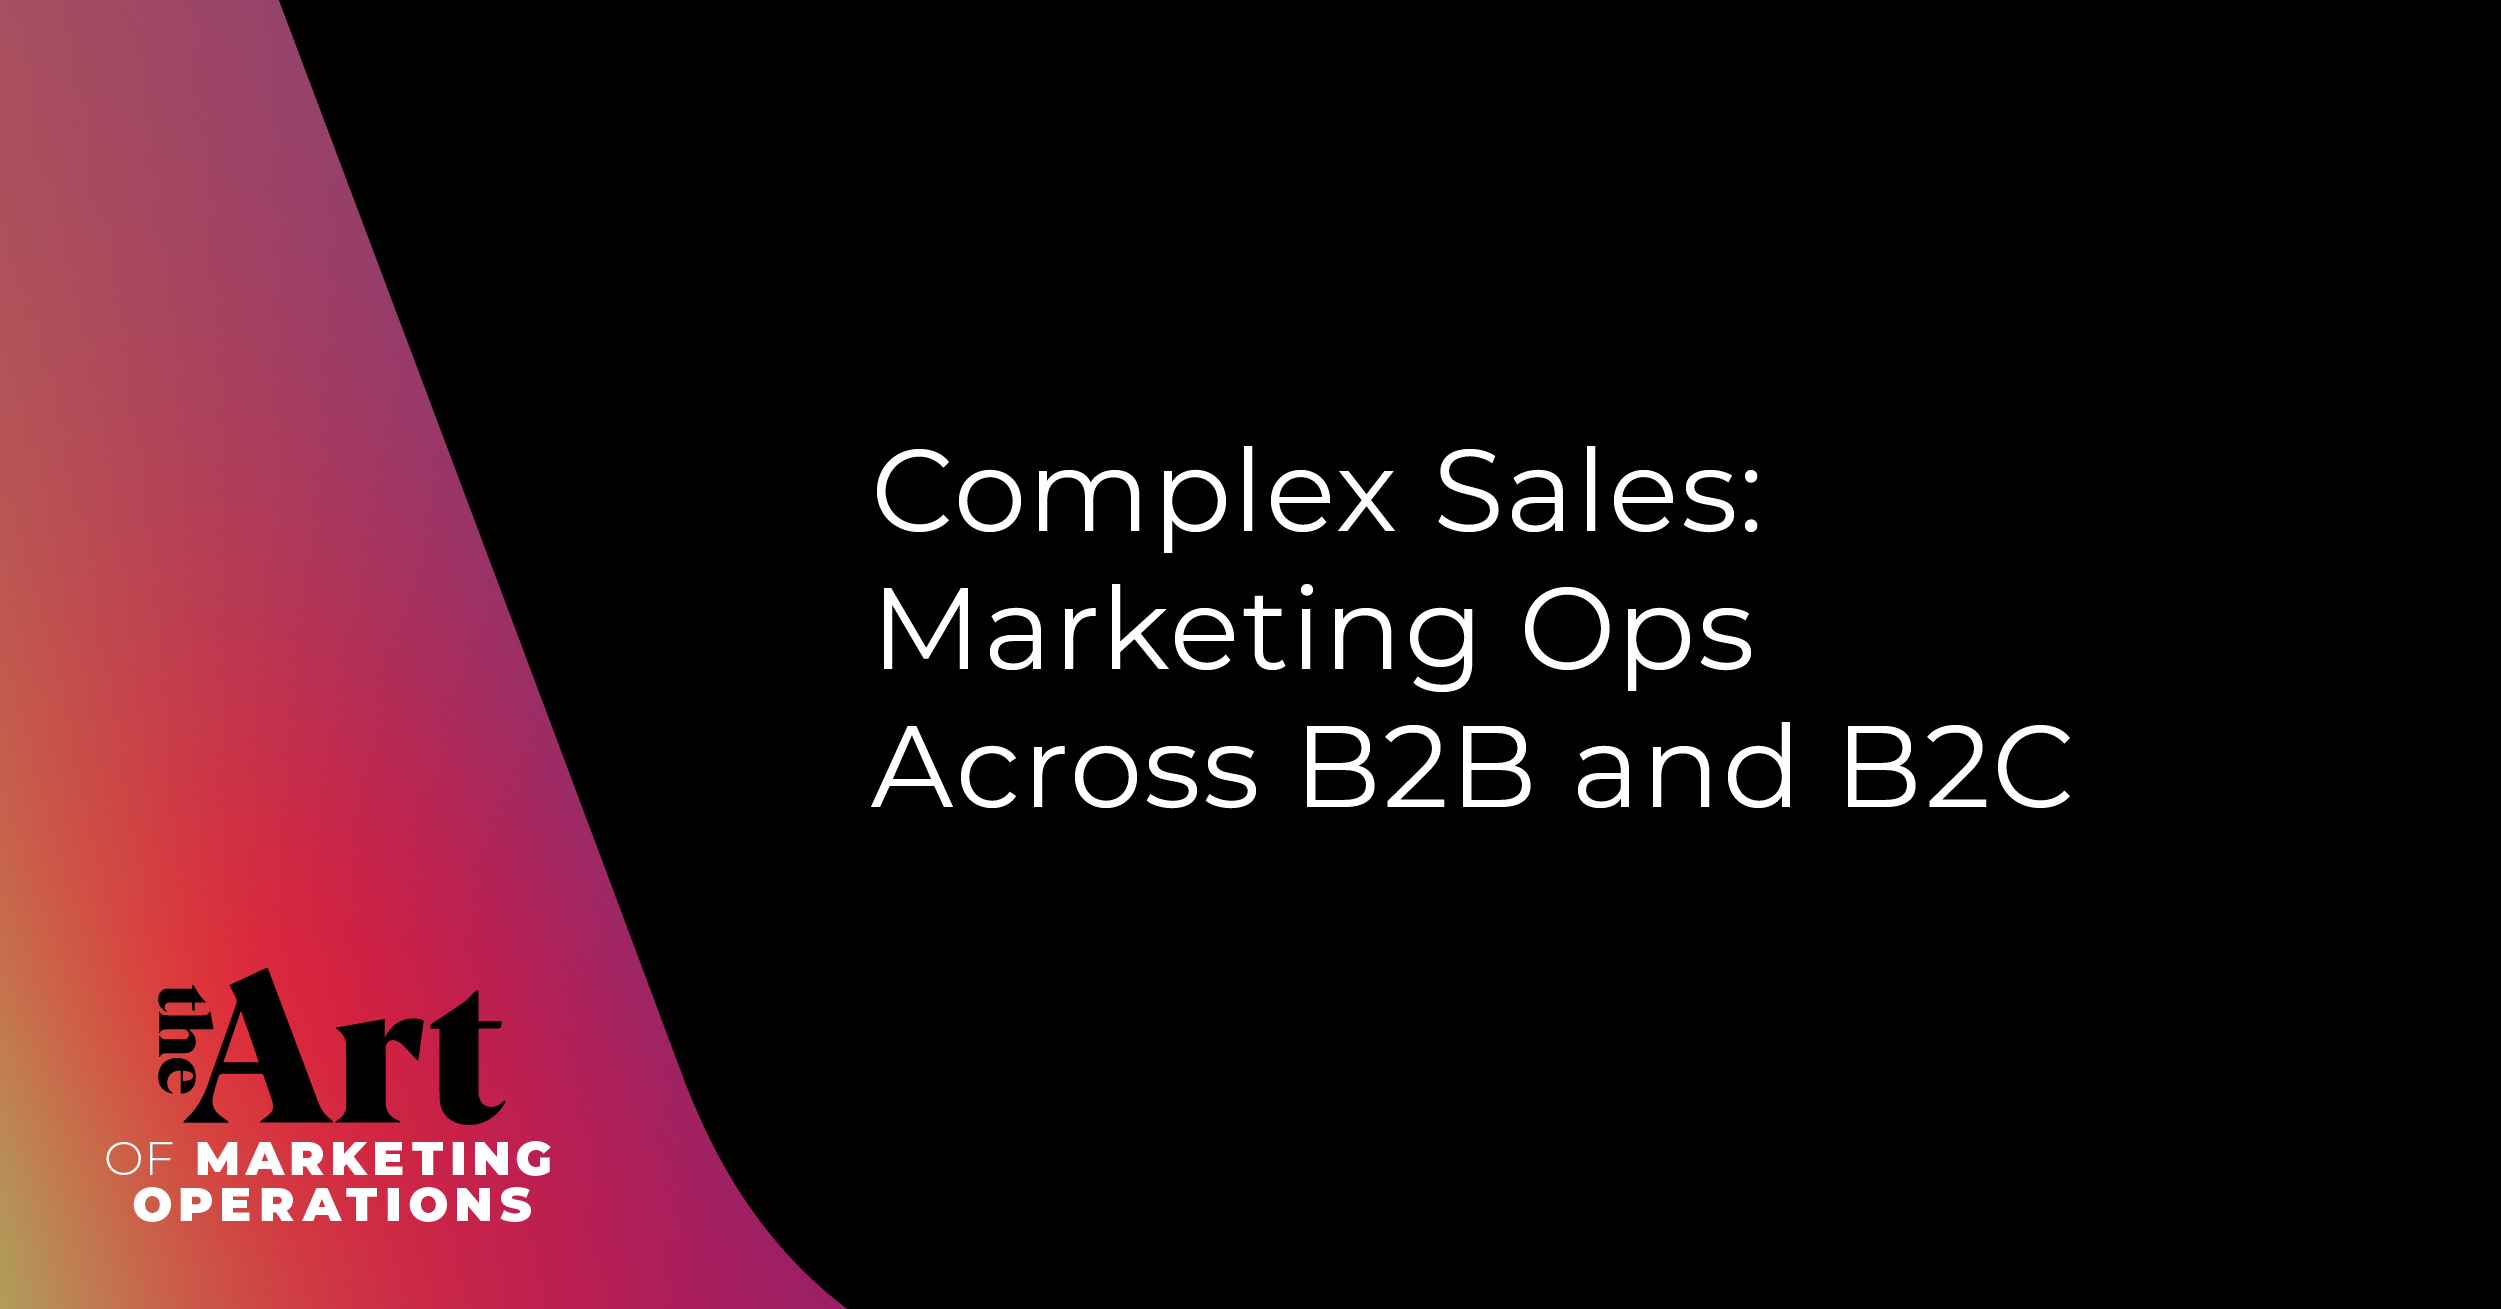 Complex Sales: Marketing Ops Across B2B and B2C